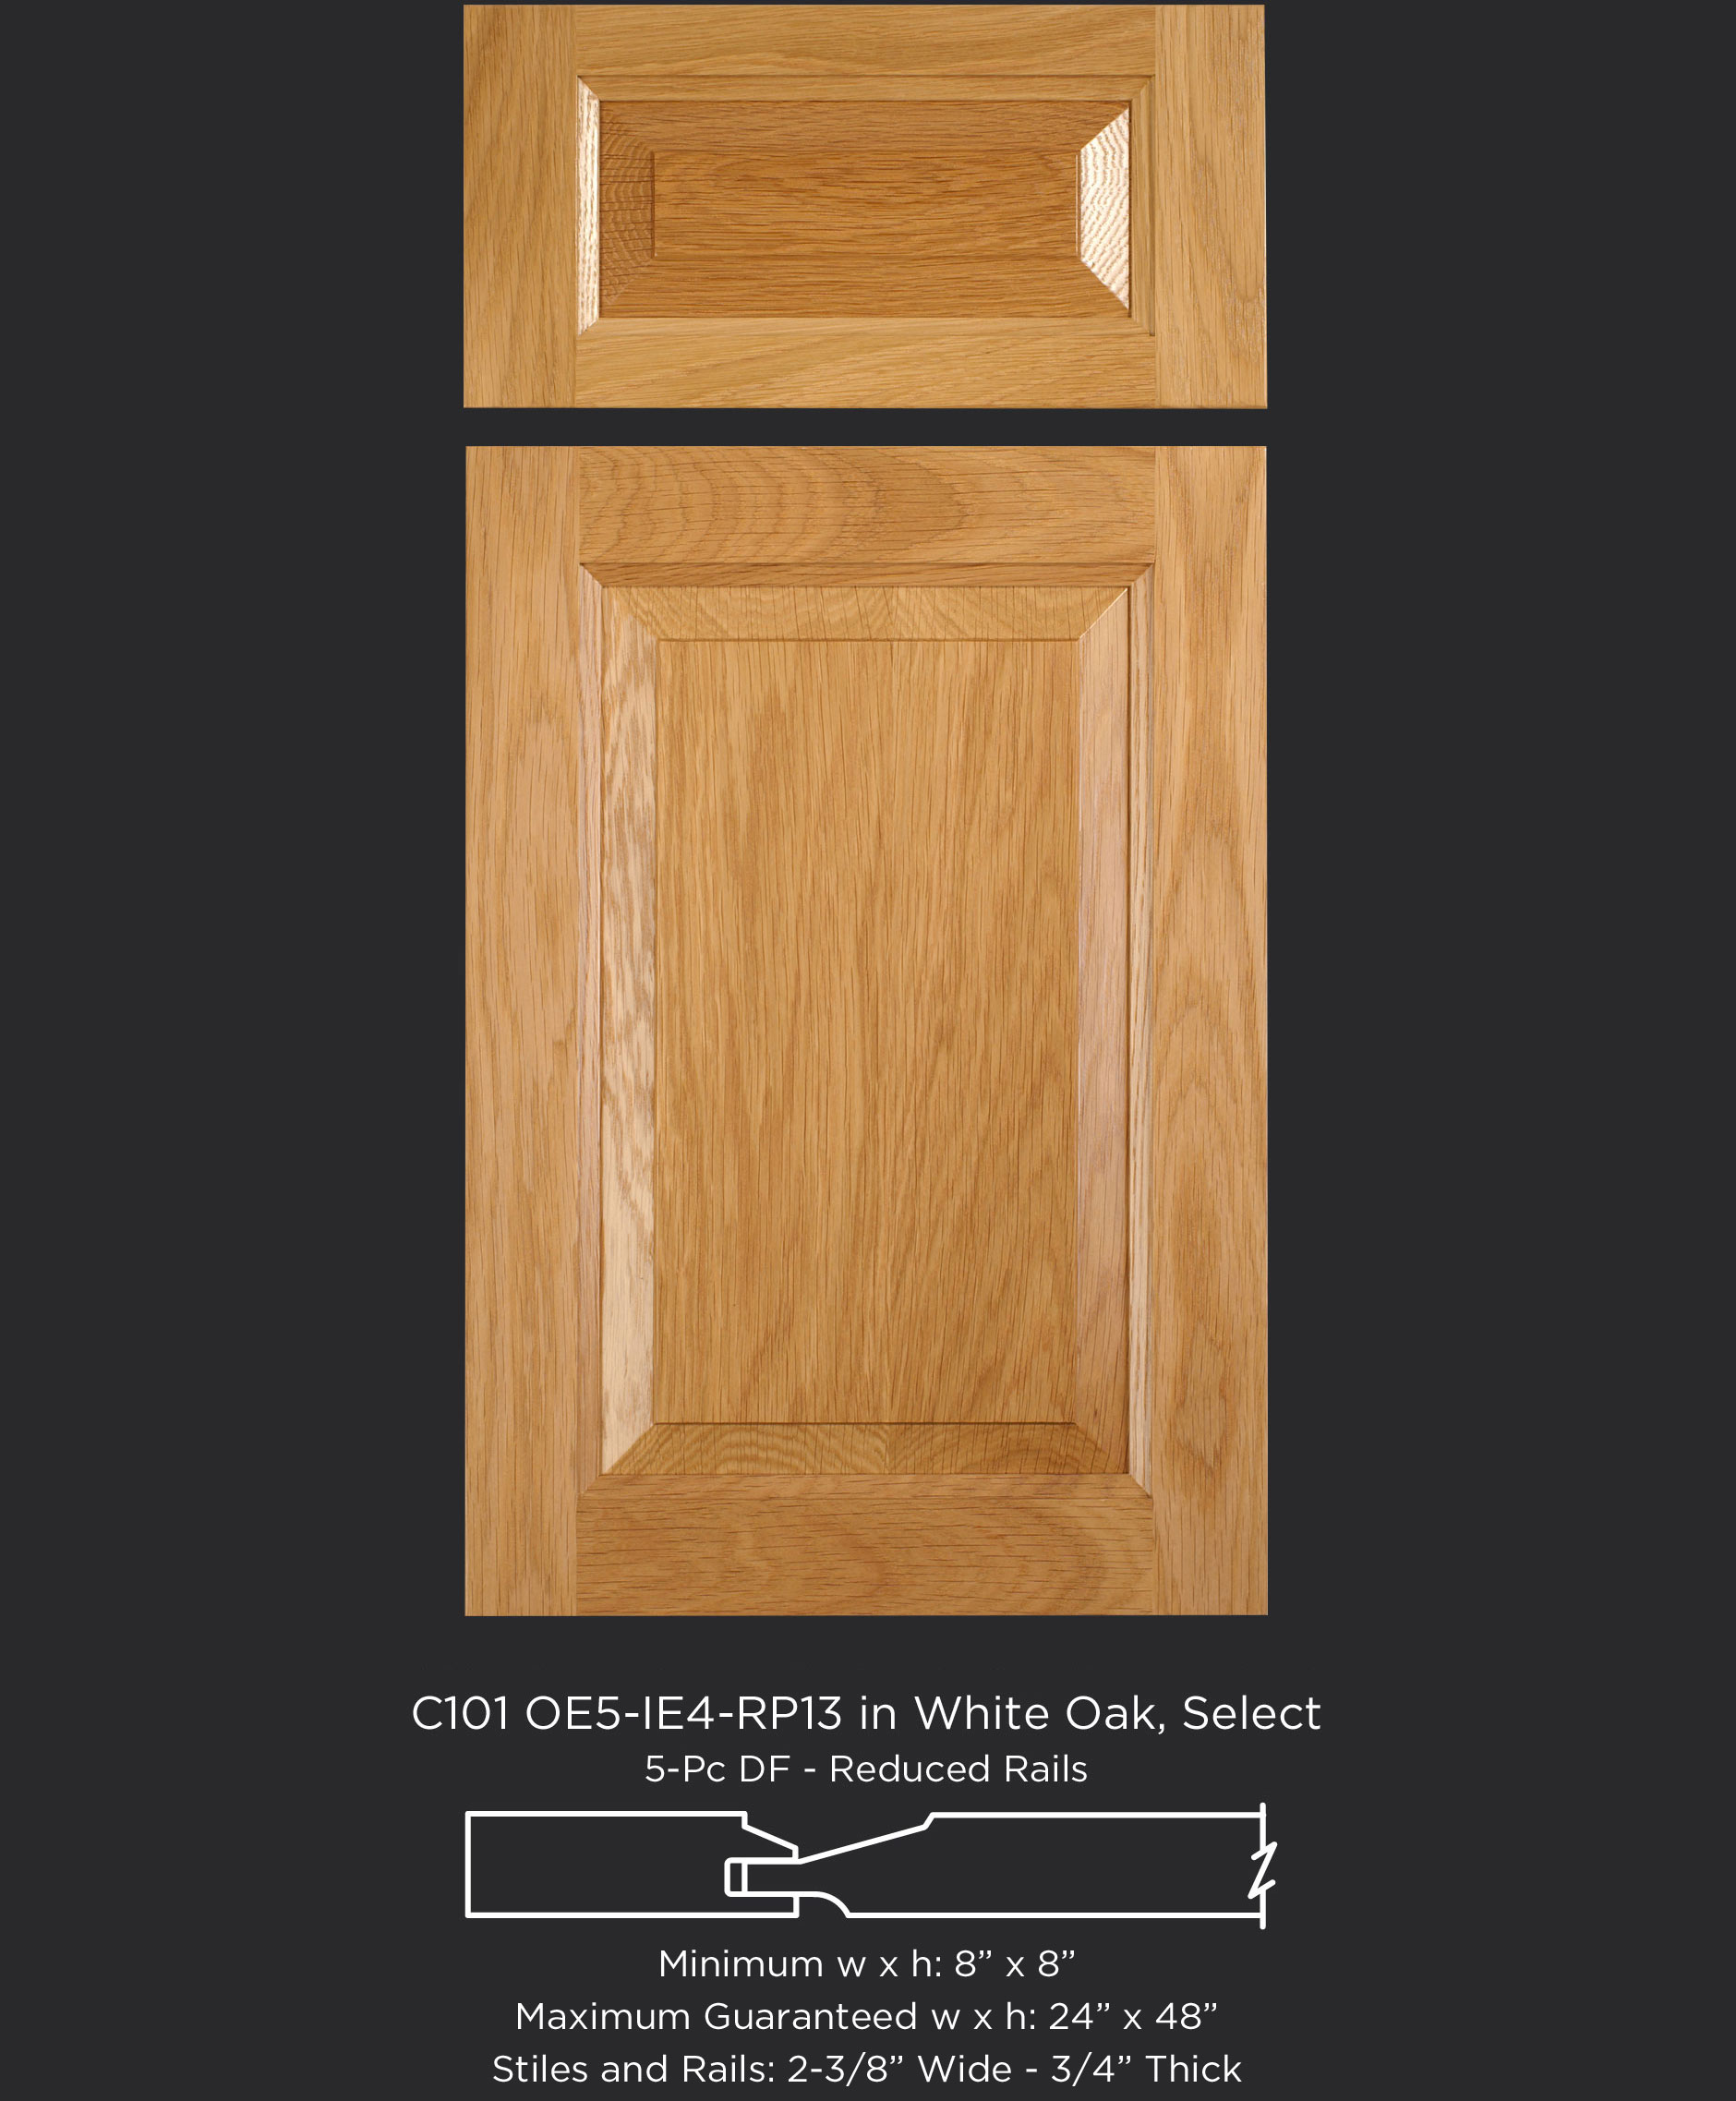 Cope and Stick Cabinet Door C101 OE5-IE4-RP13 White Oak, Select and 5-piece drawer front with reduced rails